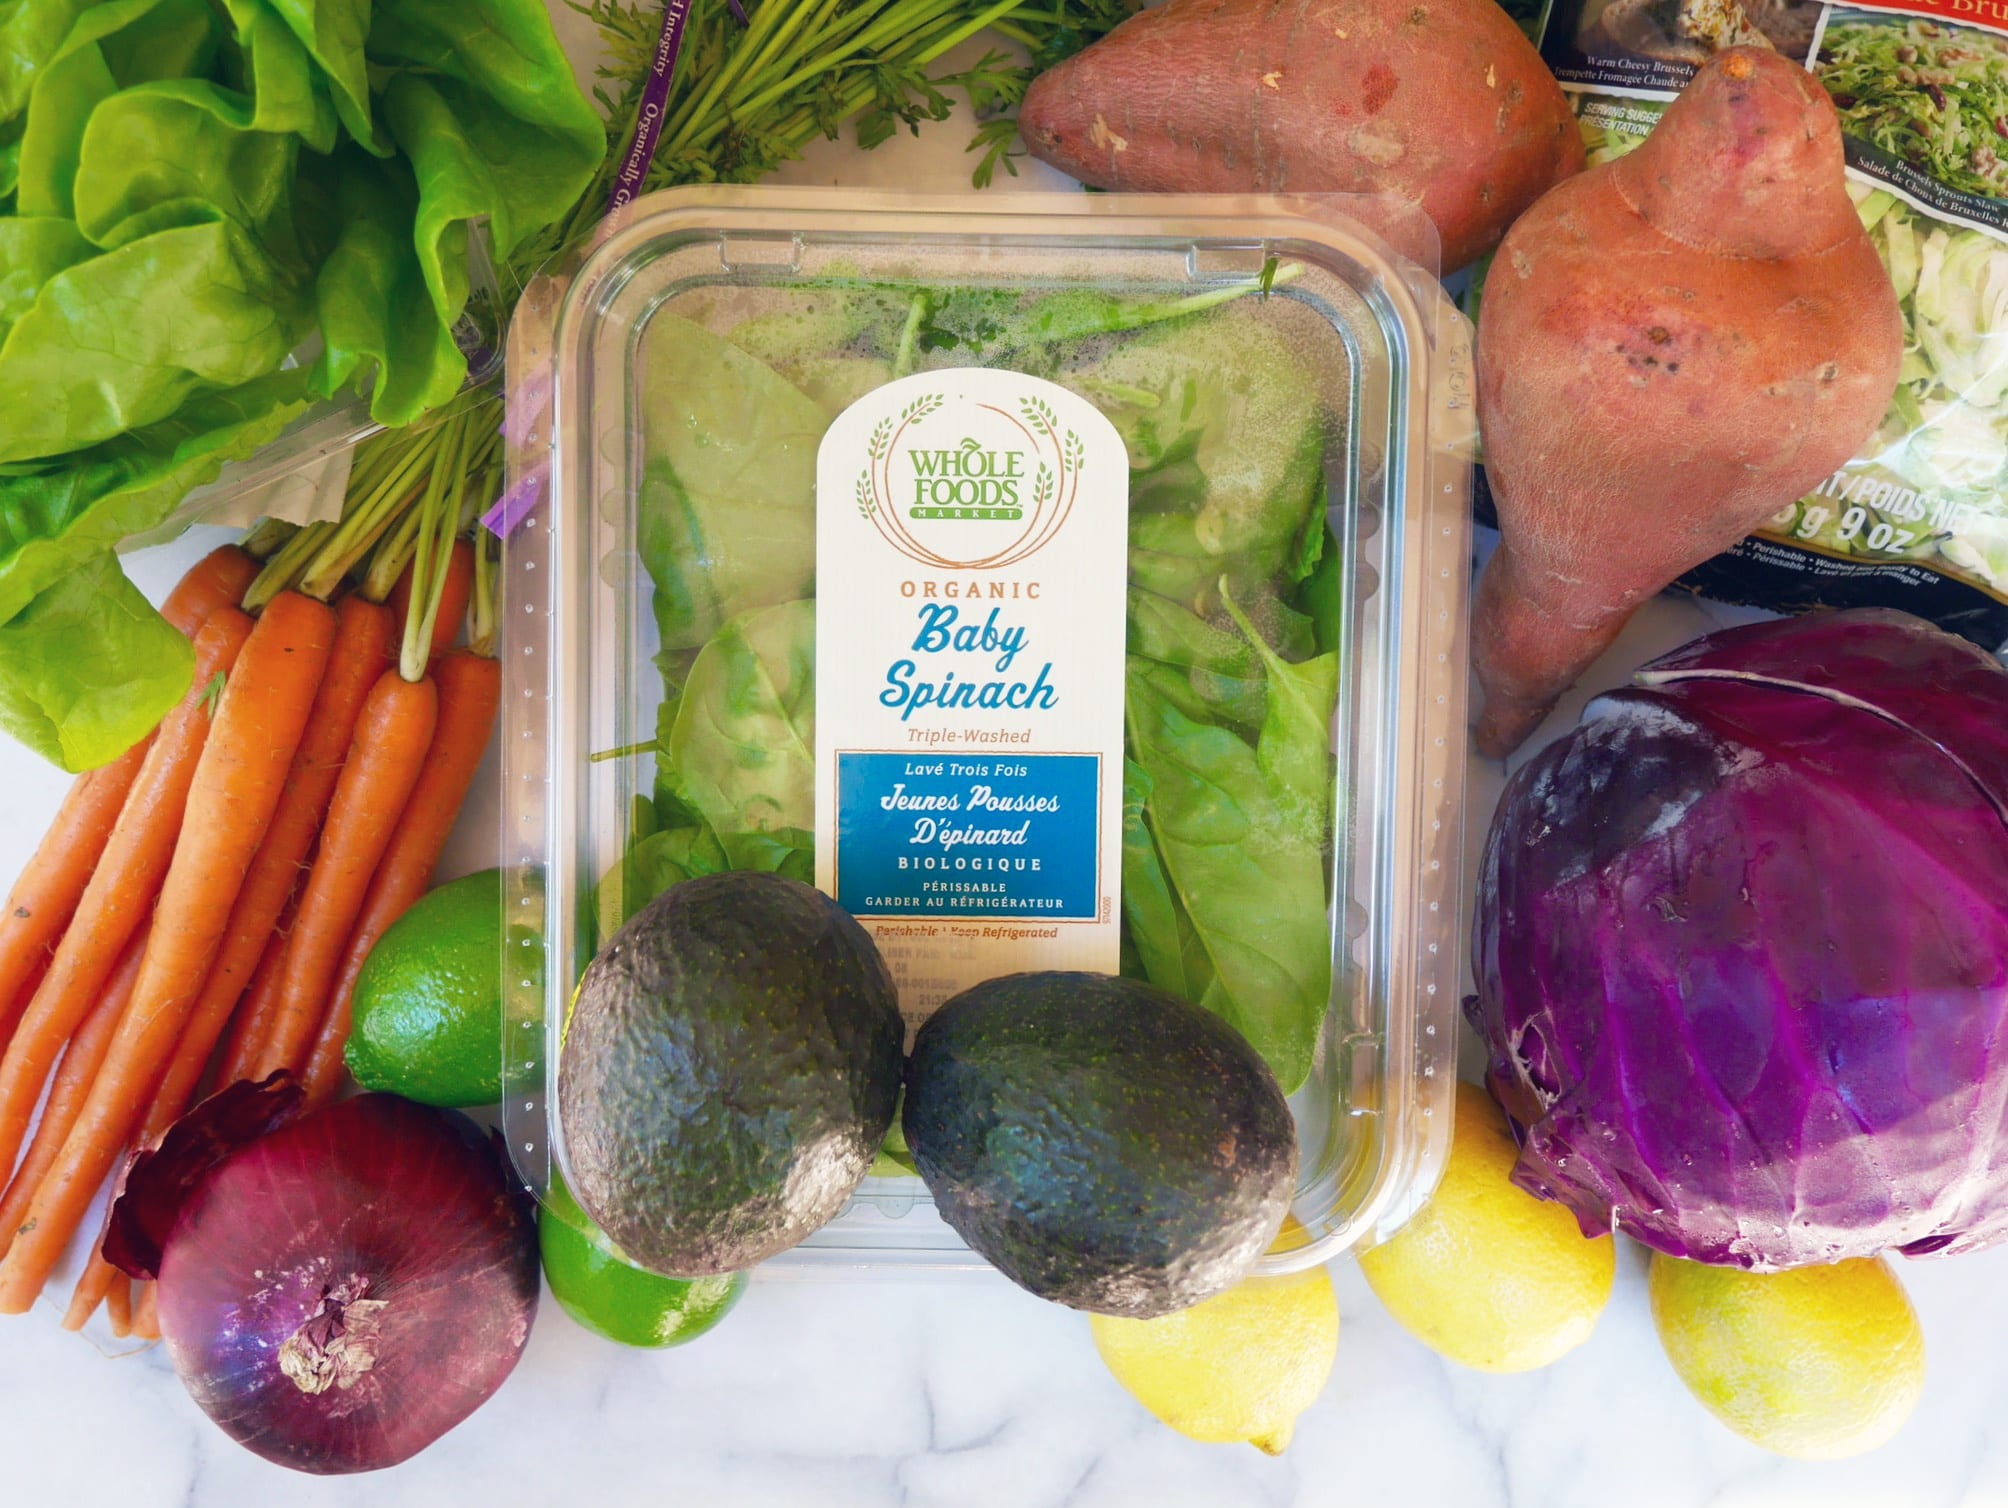 The Best Whole Foods Products On A Budget